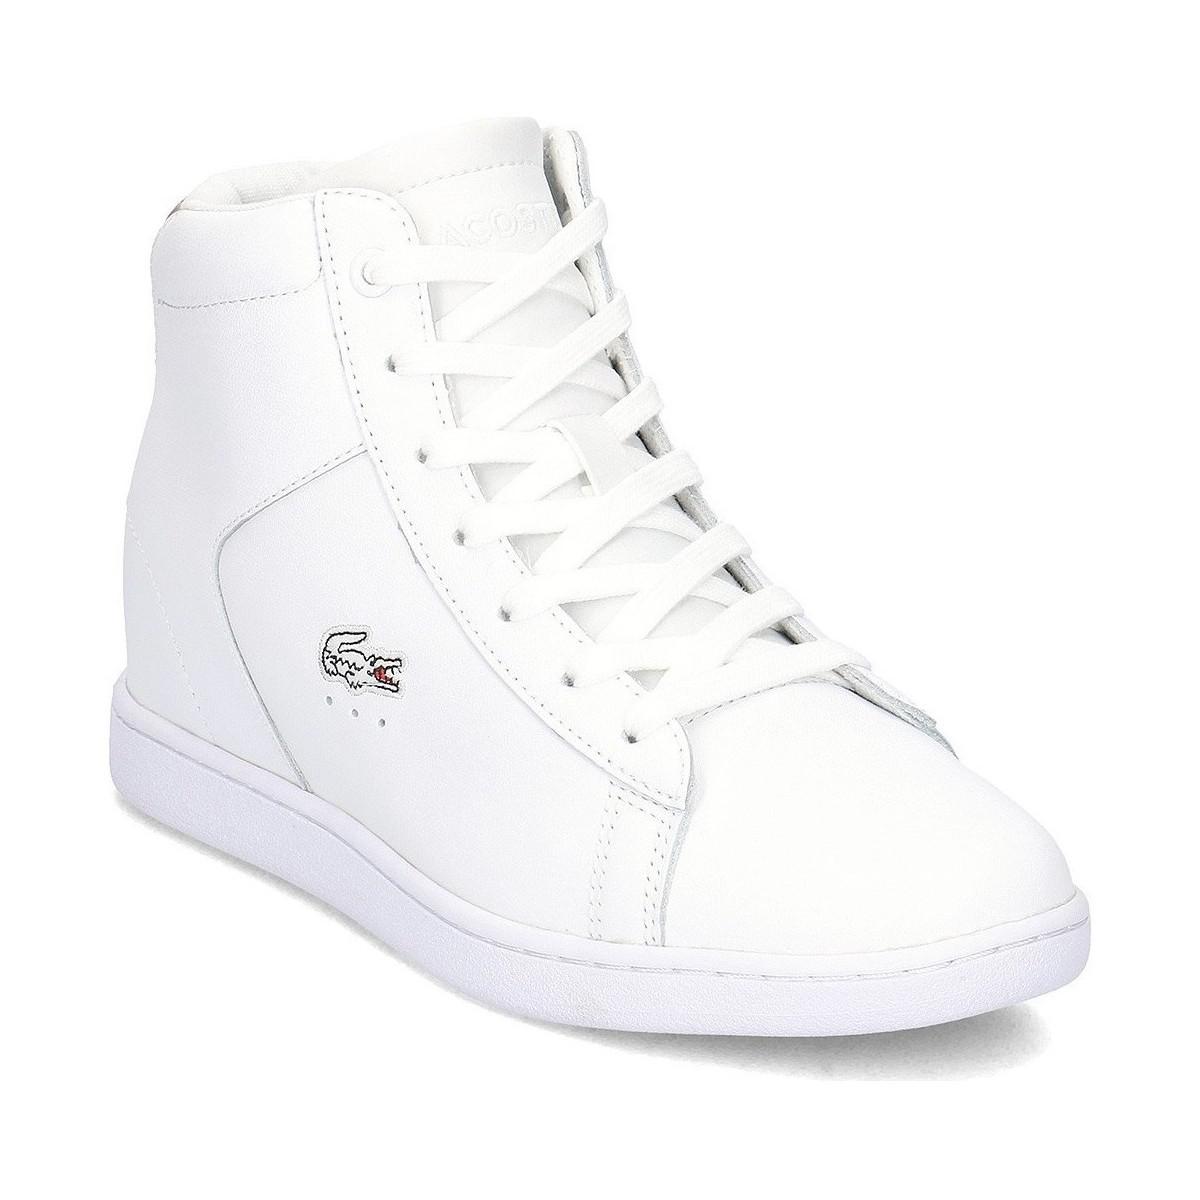 lacoste high top trainers,Quality assurance,tesas.org